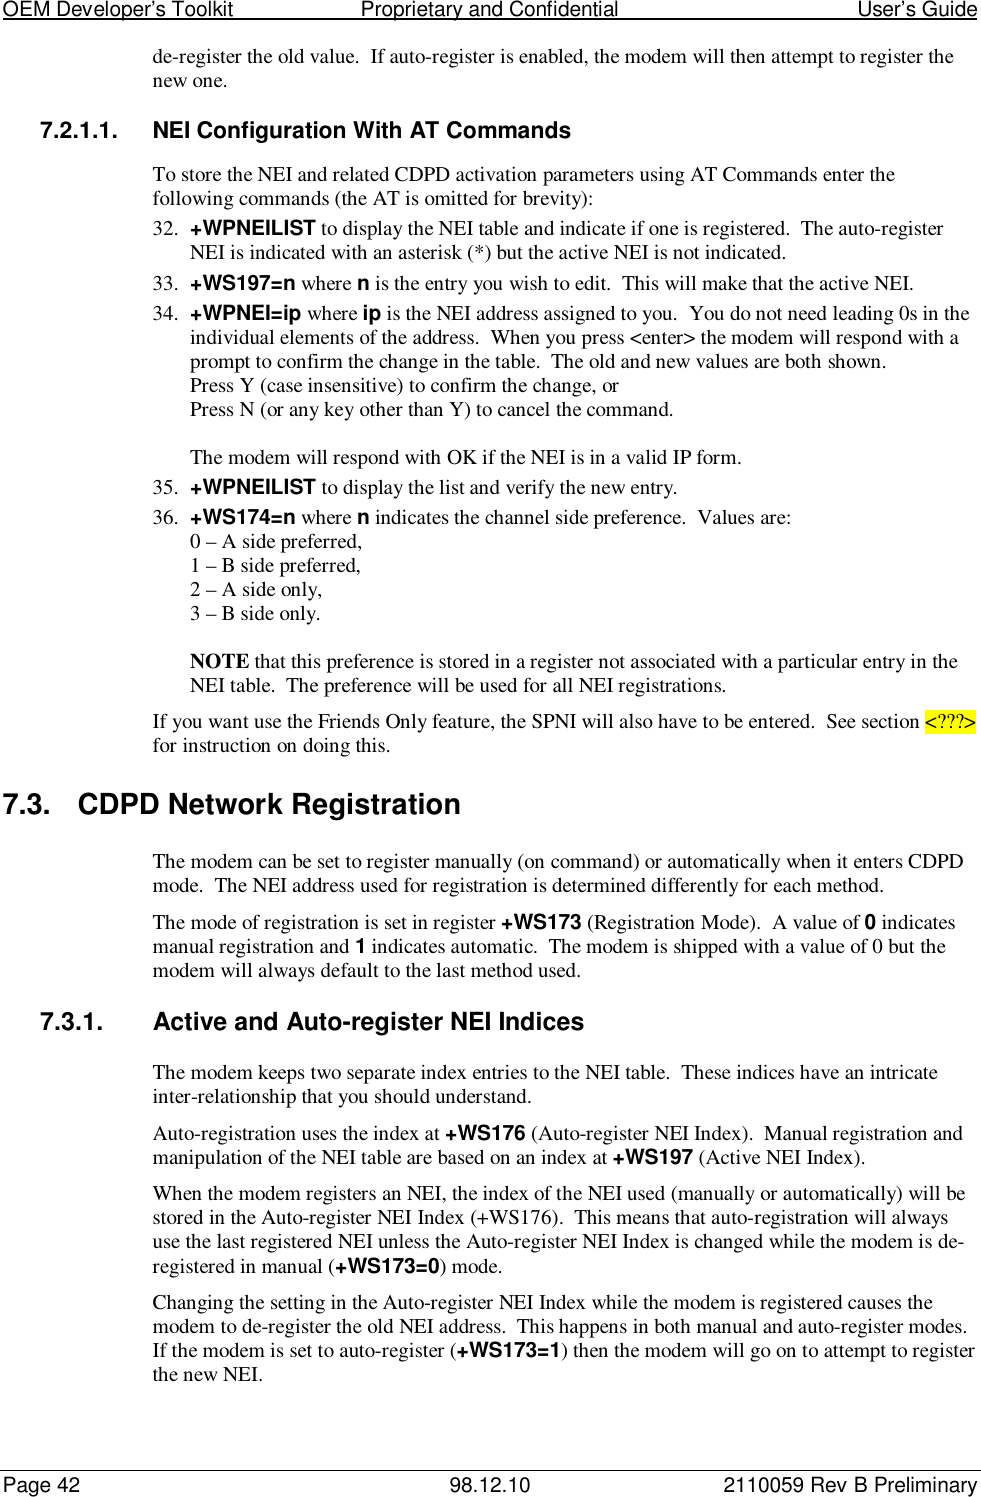 OEM Developer’s Toolkit                        Proprietary and Confidential                                        User’s GuidePage 42 98.12.10 2110059 Rev B Preliminaryde-register the old value.  If auto-register is enabled, the modem will then attempt to register thenew one.7.2.1.1.  NEI Configuration With AT CommandsTo store the NEI and related CDPD activation parameters using AT Commands enter thefollowing commands (the AT is omitted for brevity):32. +WPNEILIST to display the NEI table and indicate if one is registered.  The auto-registerNEI is indicated with an asterisk (*) but the active NEI is not indicated.33. +WS197=n where n is the entry you wish to edit.  This will make that the active NEI.34. +WPNEI=ip where ip is the NEI address assigned to you.  You do not need leading 0s in theindividual elements of the address.  When you press &lt;enter&gt; the modem will respond with aprompt to confirm the change in the table.  The old and new values are both shown.Press Y (case insensitive) to confirm the change, orPress N (or any key other than Y) to cancel the command.The modem will respond with OK if the NEI is in a valid IP form.35. +WPNEILIST to display the list and verify the new entry.36. +WS174=n where n indicates the channel side preference.  Values are:0 – A side preferred,1 – B side preferred,2 – A side only,3 – B side only.NOTE that this preference is stored in a register not associated with a particular entry in theNEI table.  The preference will be used for all NEI registrations.If you want use the Friends Only feature, the SPNI will also have to be entered.  See section &lt;???&gt;for instruction on doing this.7.3. CDPD Network RegistrationThe modem can be set to register manually (on command) or automatically when it enters CDPDmode.  The NEI address used for registration is determined differently for each method.The mode of registration is set in register +WS173 (Registration Mode).  A value of 0 indicatesmanual registration and 1 indicates automatic.  The modem is shipped with a value of 0 but themodem will always default to the last method used.7.3.1.  Active and Auto-register NEI IndicesThe modem keeps two separate index entries to the NEI table.  These indices have an intricateinter-relationship that you should understand.Auto-registration uses the index at +WS176 (Auto-register NEI Index).  Manual registration andmanipulation of the NEI table are based on an index at +WS197 (Active NEI Index).When the modem registers an NEI, the index of the NEI used (manually or automatically) will bestored in the Auto-register NEI Index (+WS176).  This means that auto-registration will alwaysuse the last registered NEI unless the Auto-register NEI Index is changed while the modem is de-registered in manual (+WS173=0) mode.Changing the setting in the Auto-register NEI Index while the modem is registered causes themodem to de-register the old NEI address.  This happens in both manual and auto-register modes.If the modem is set to auto-register (+WS173=1) then the modem will go on to attempt to registerthe new NEI.